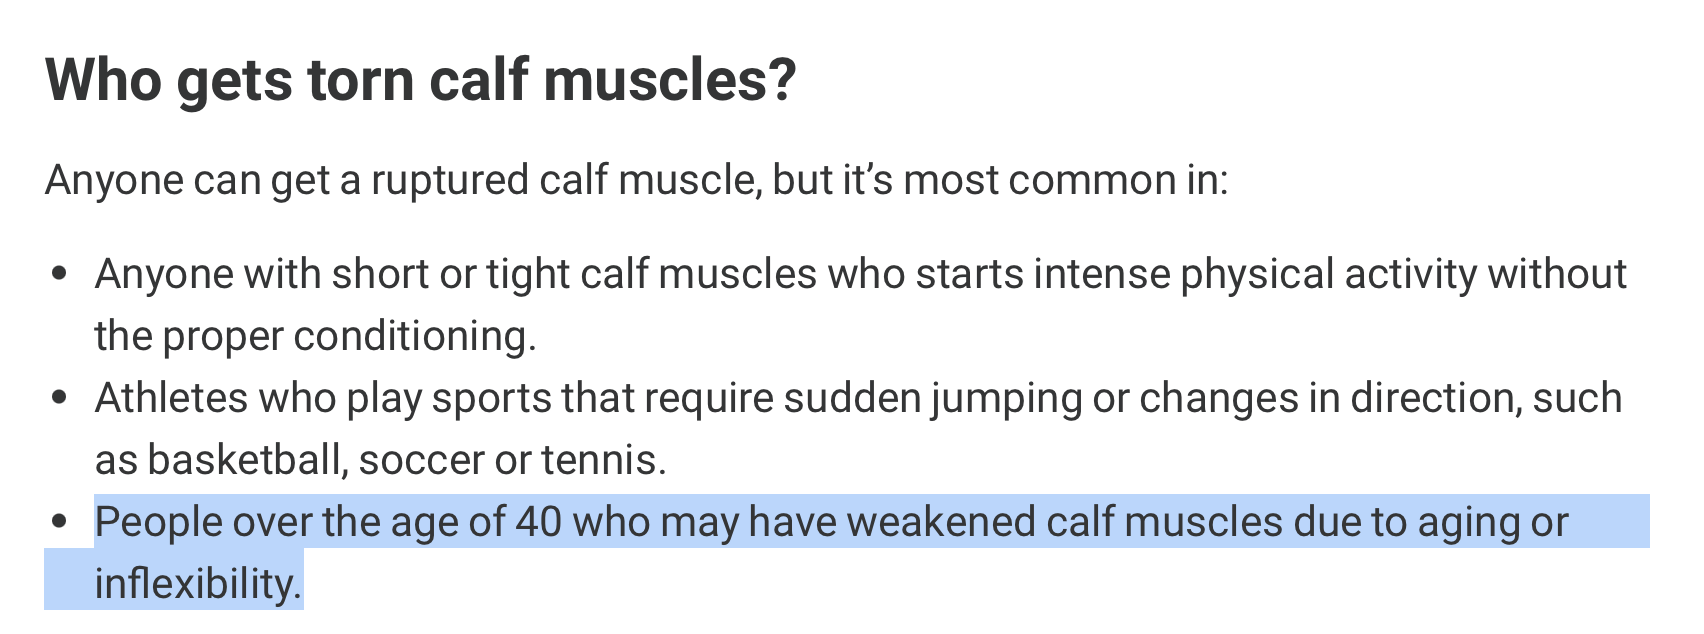 Screenshot of informational list "Who gets torn calf muscles" with highlighted item "People over the age of 40 who may have weakened calf muscles due to aging or inflexibility."